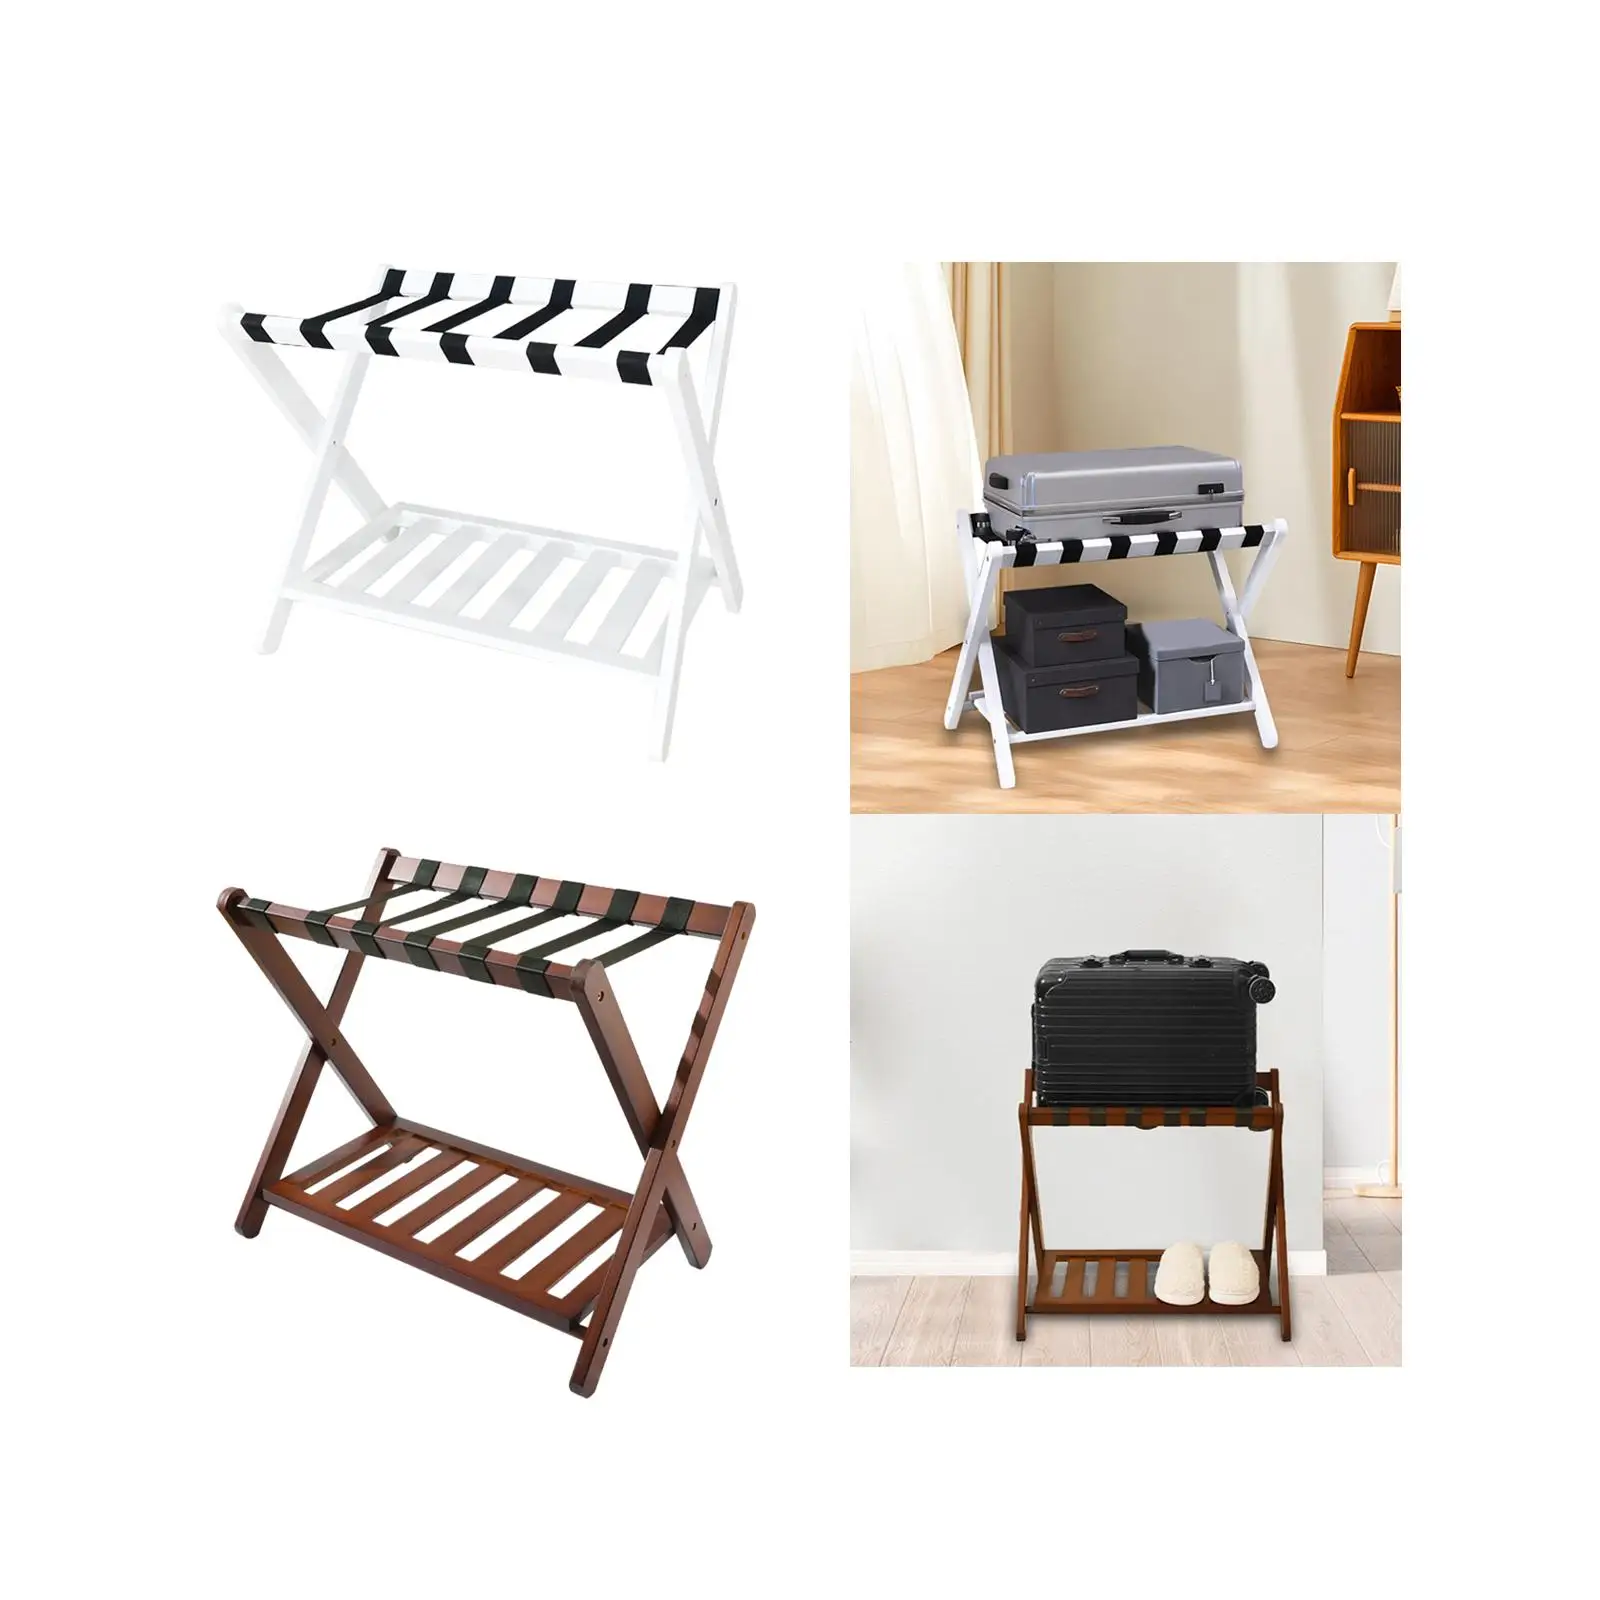 Guest Room Bamboo Foldable Luggage Rack Sturdy Multifunctional Convenient Stylish 26x17x21inch Portable with Nylon Straps images - 6